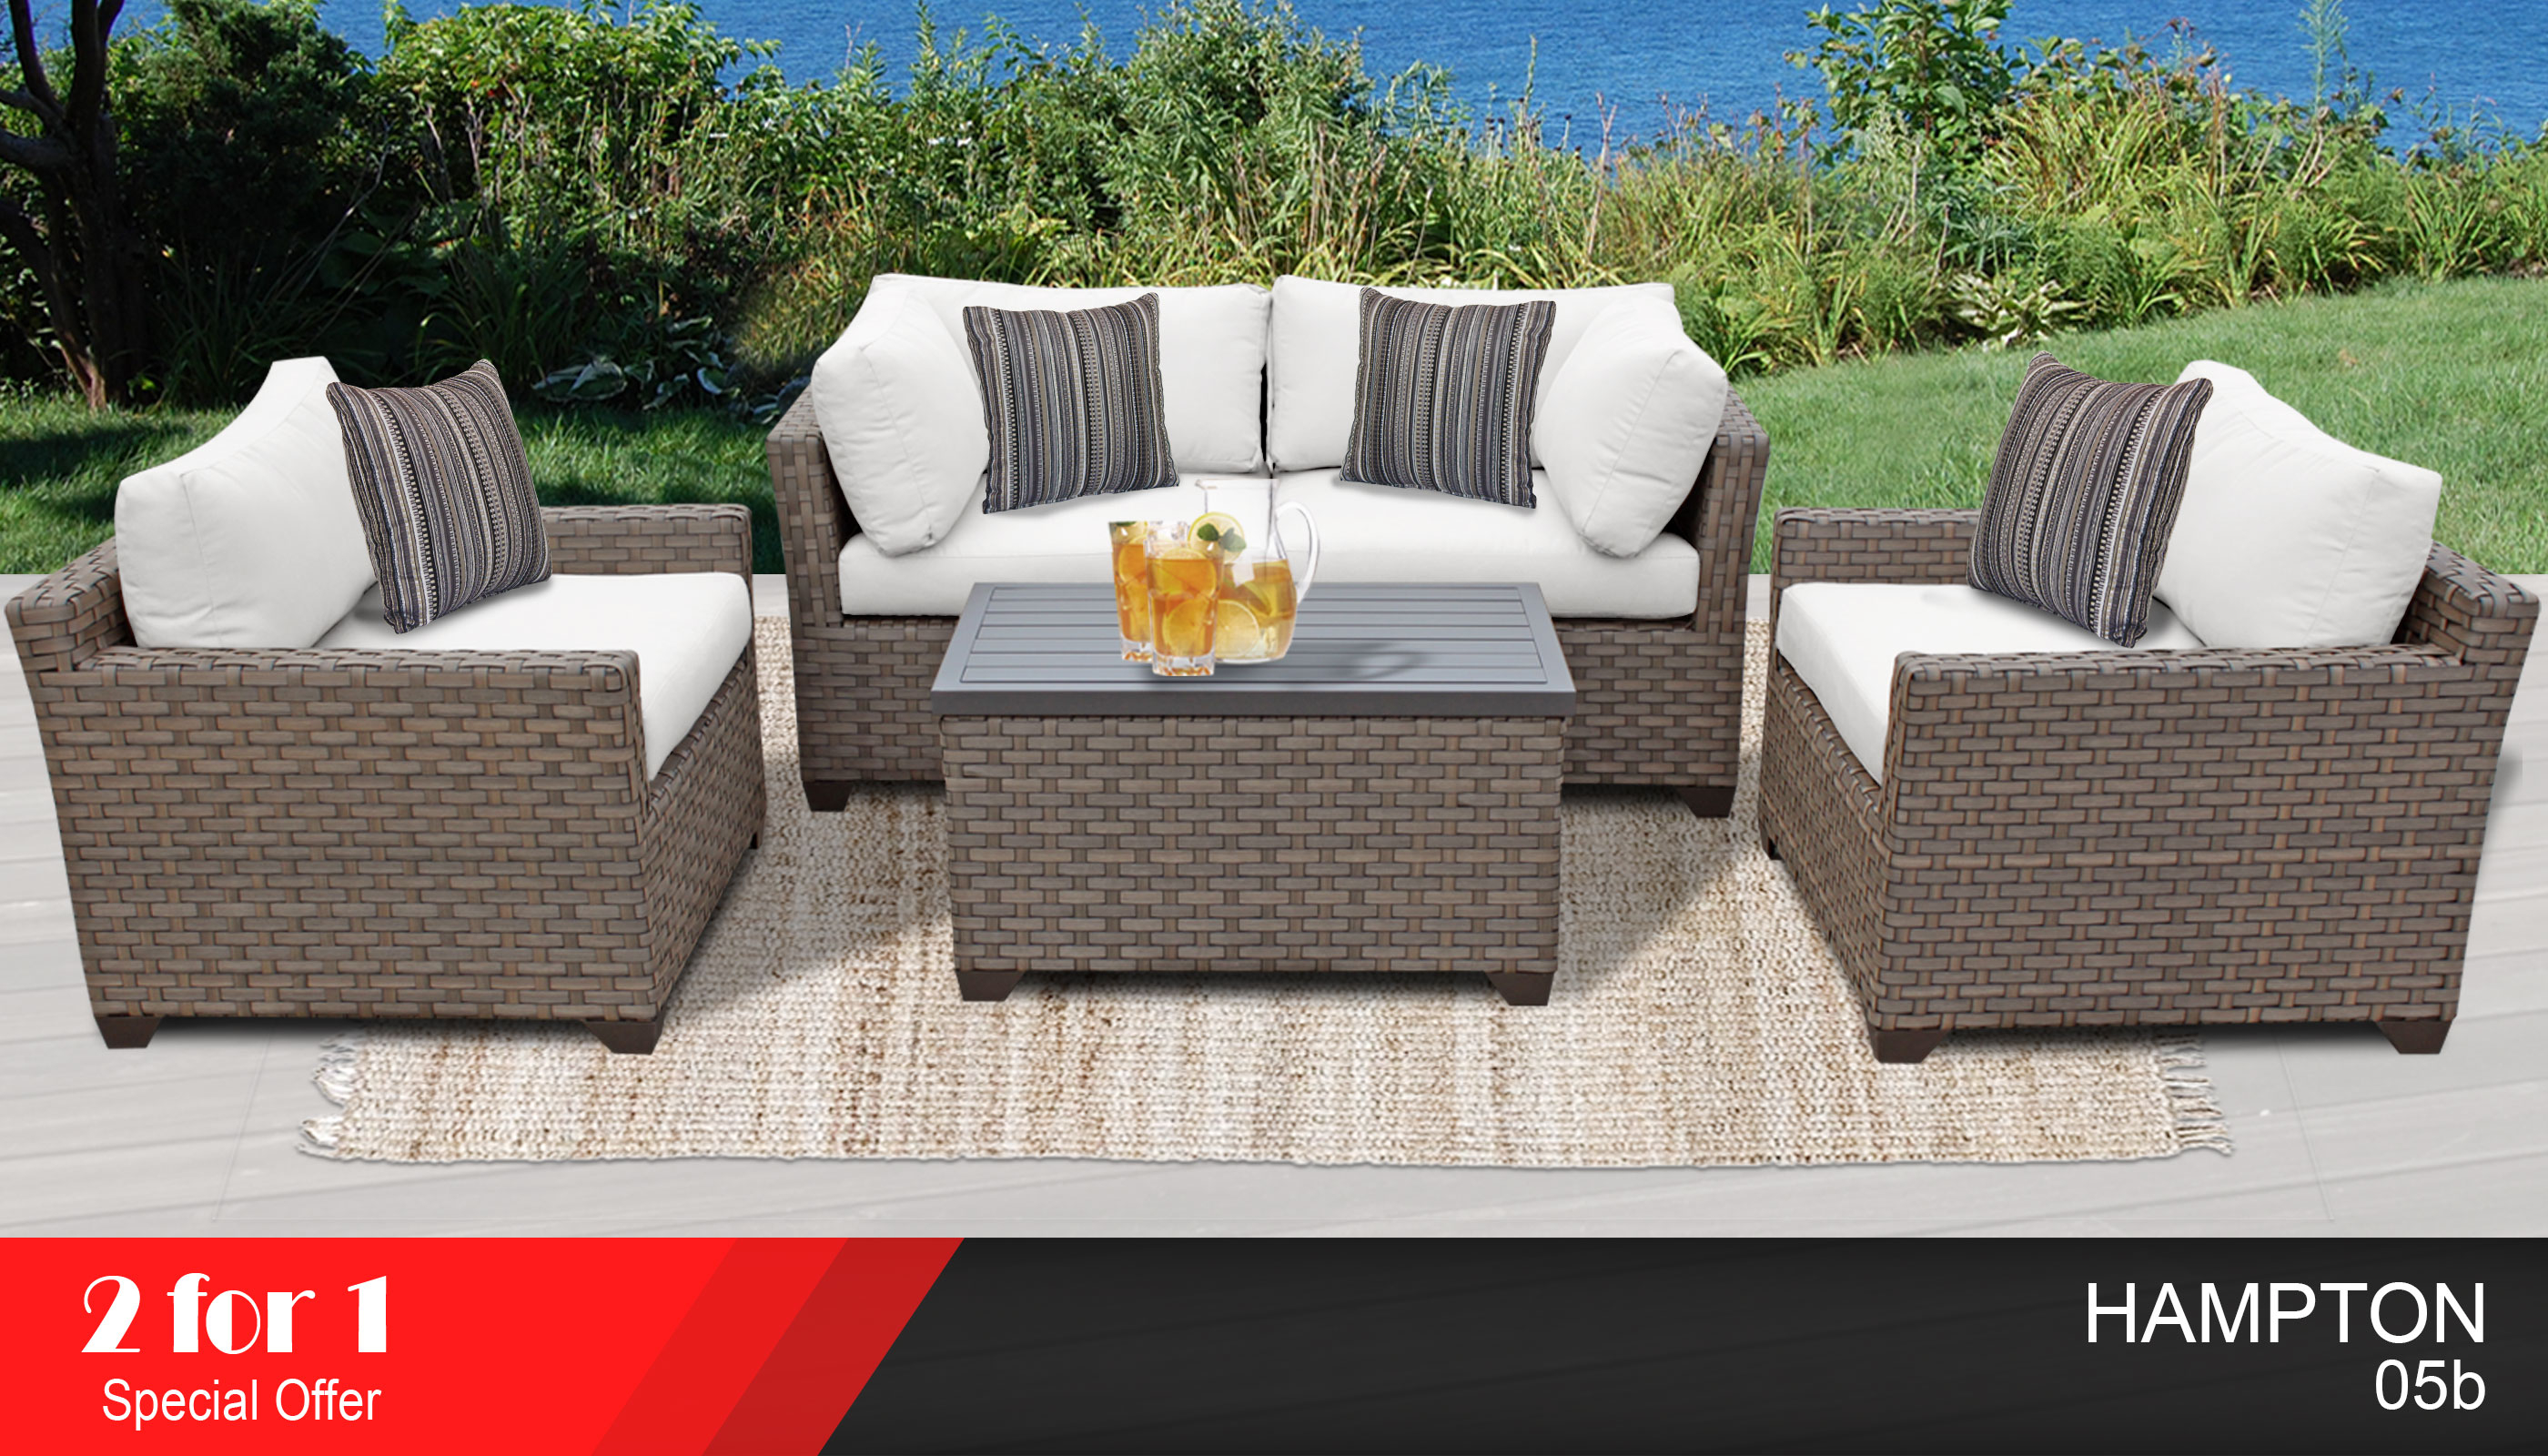 Details About Hampton 5 Piece Outdoor Wicker Patio Furniture Set 05b 2 For 1 pertaining to proportions 2800 X 1600